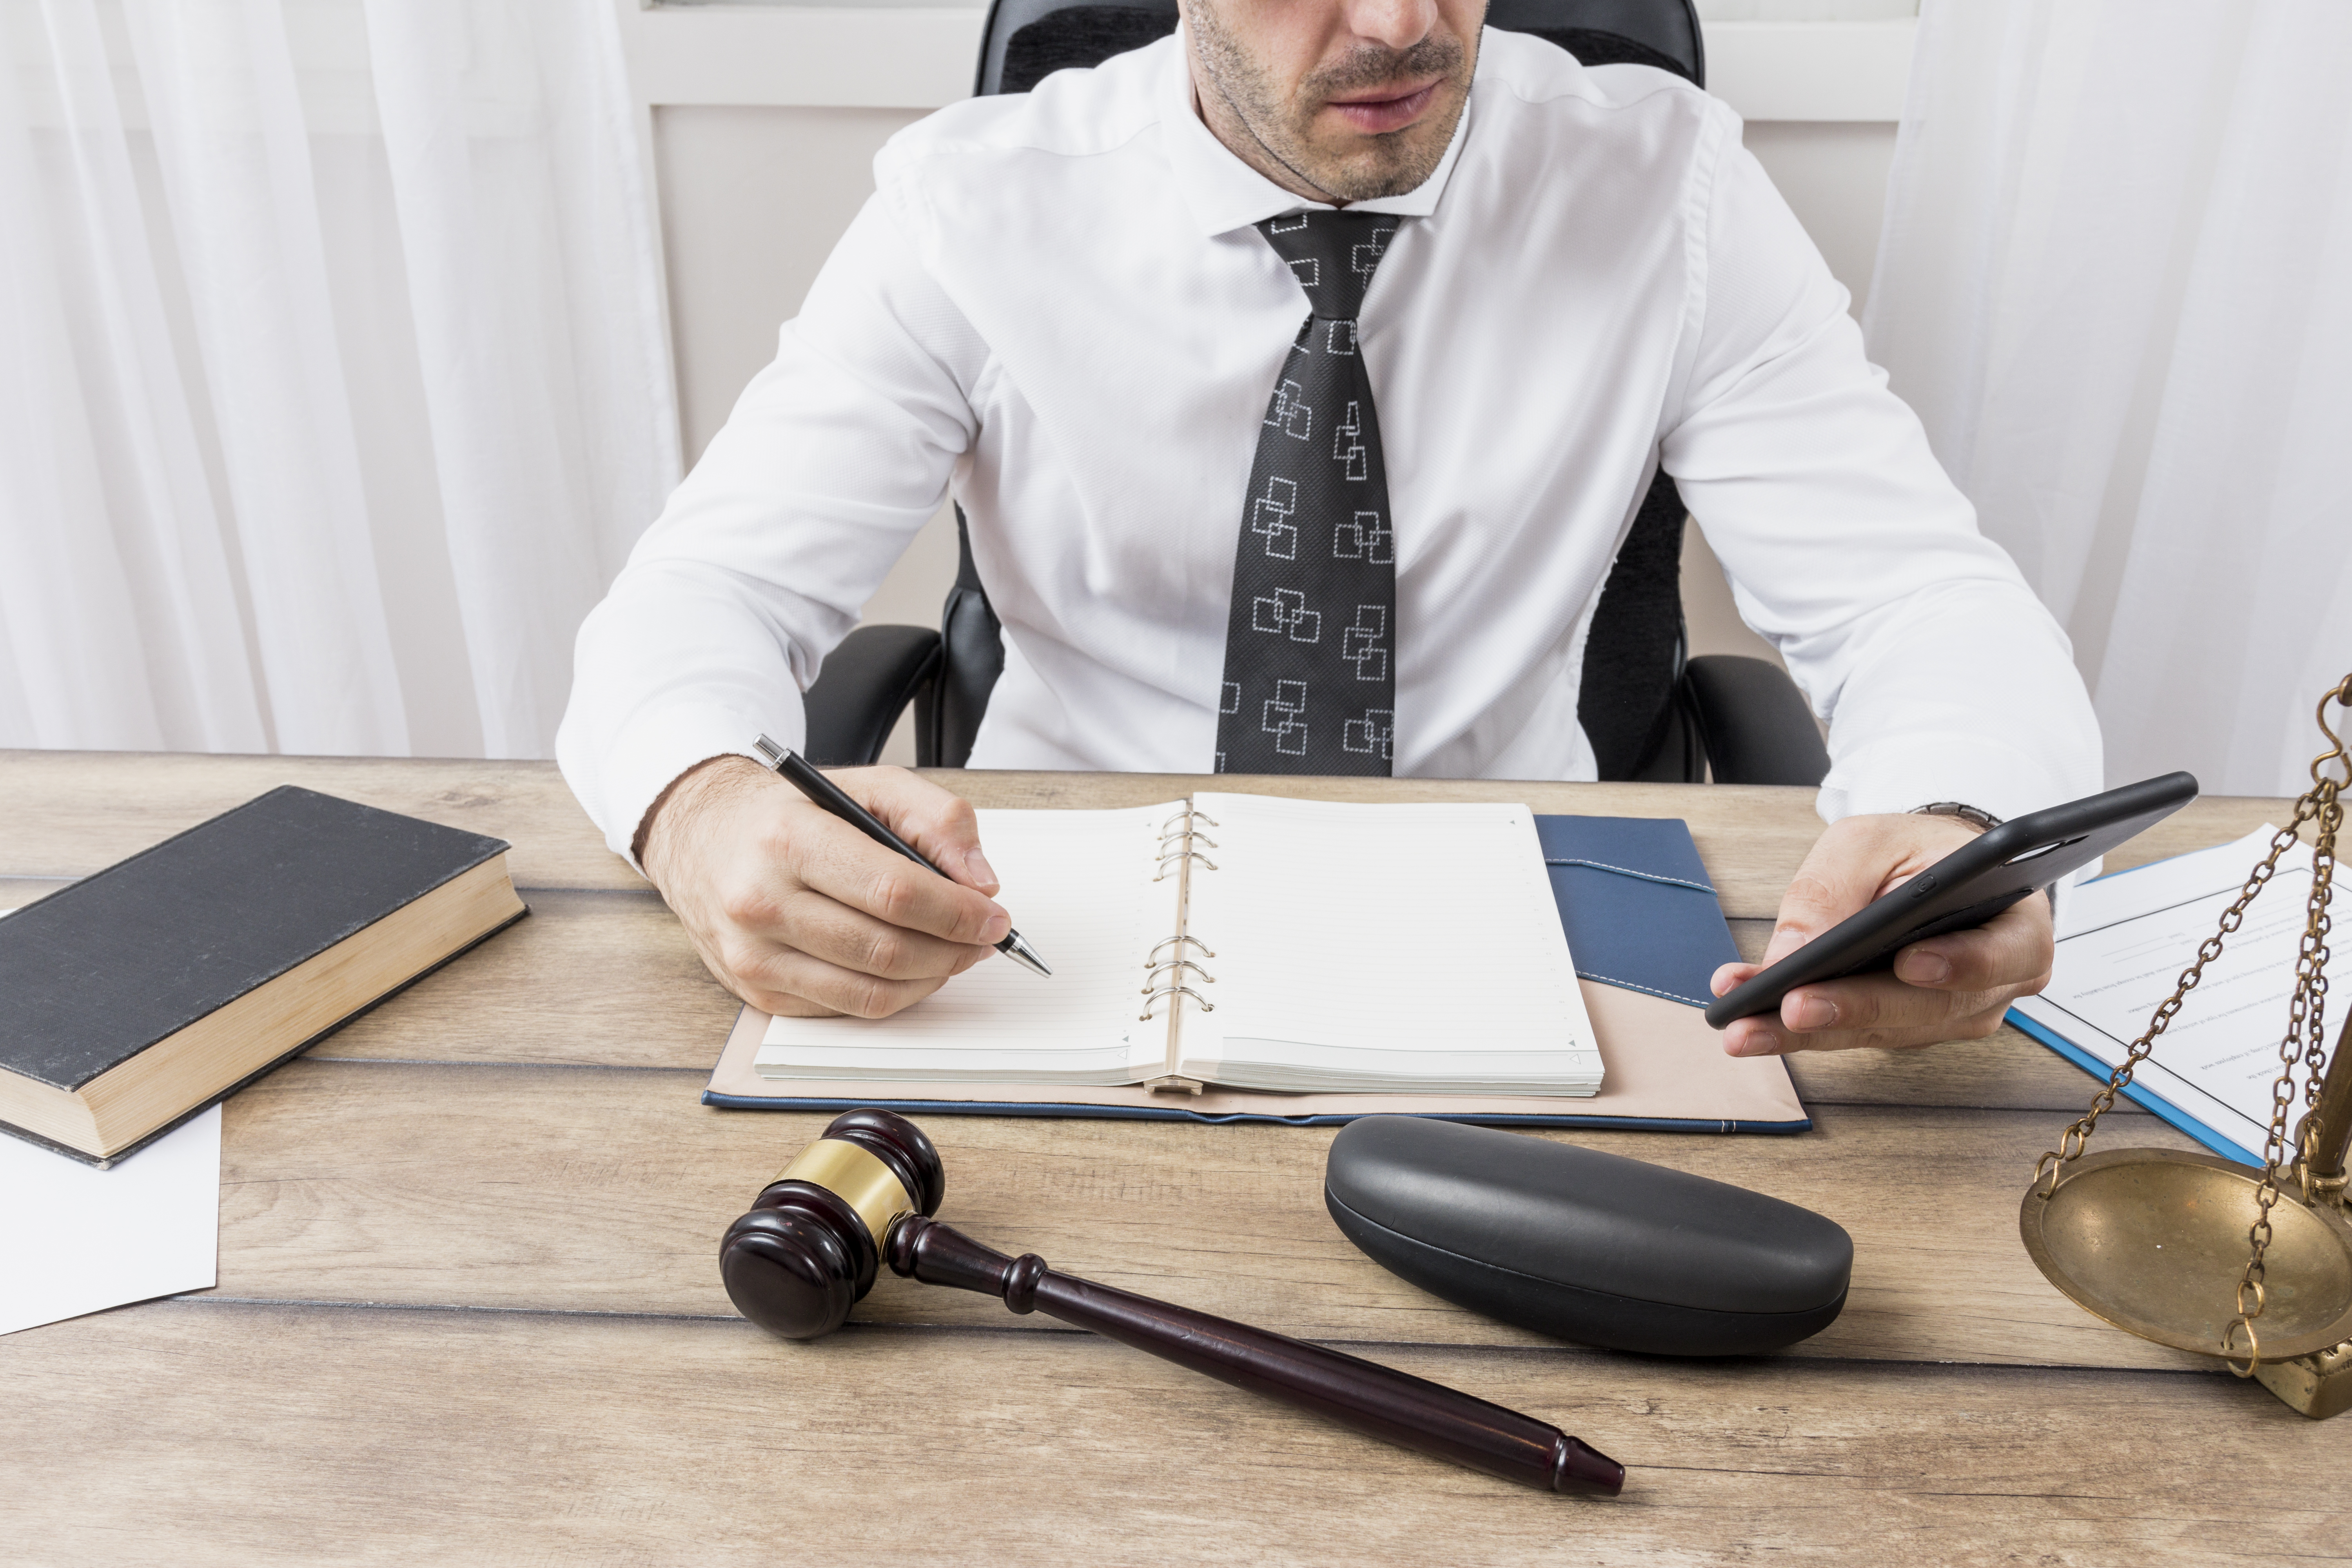 A lawyer sitting at his desk, checking his smartphone and writing on a notebook.